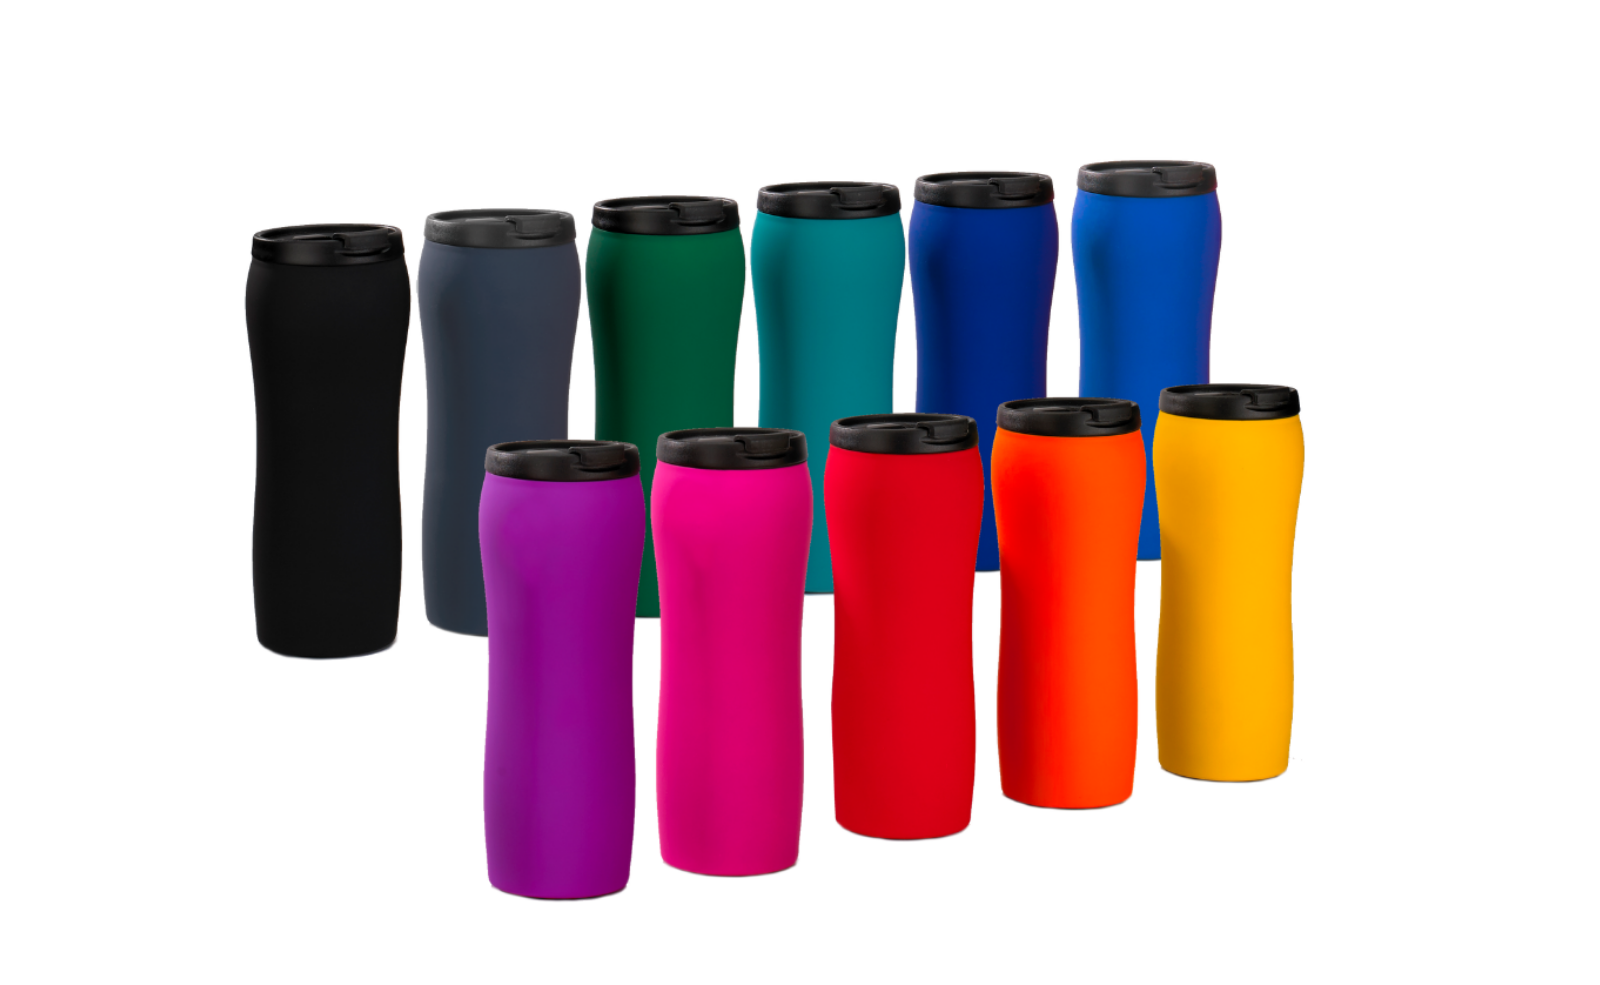 SOFT-TOUCH THERMAL MUG FROM COLORISSIMO